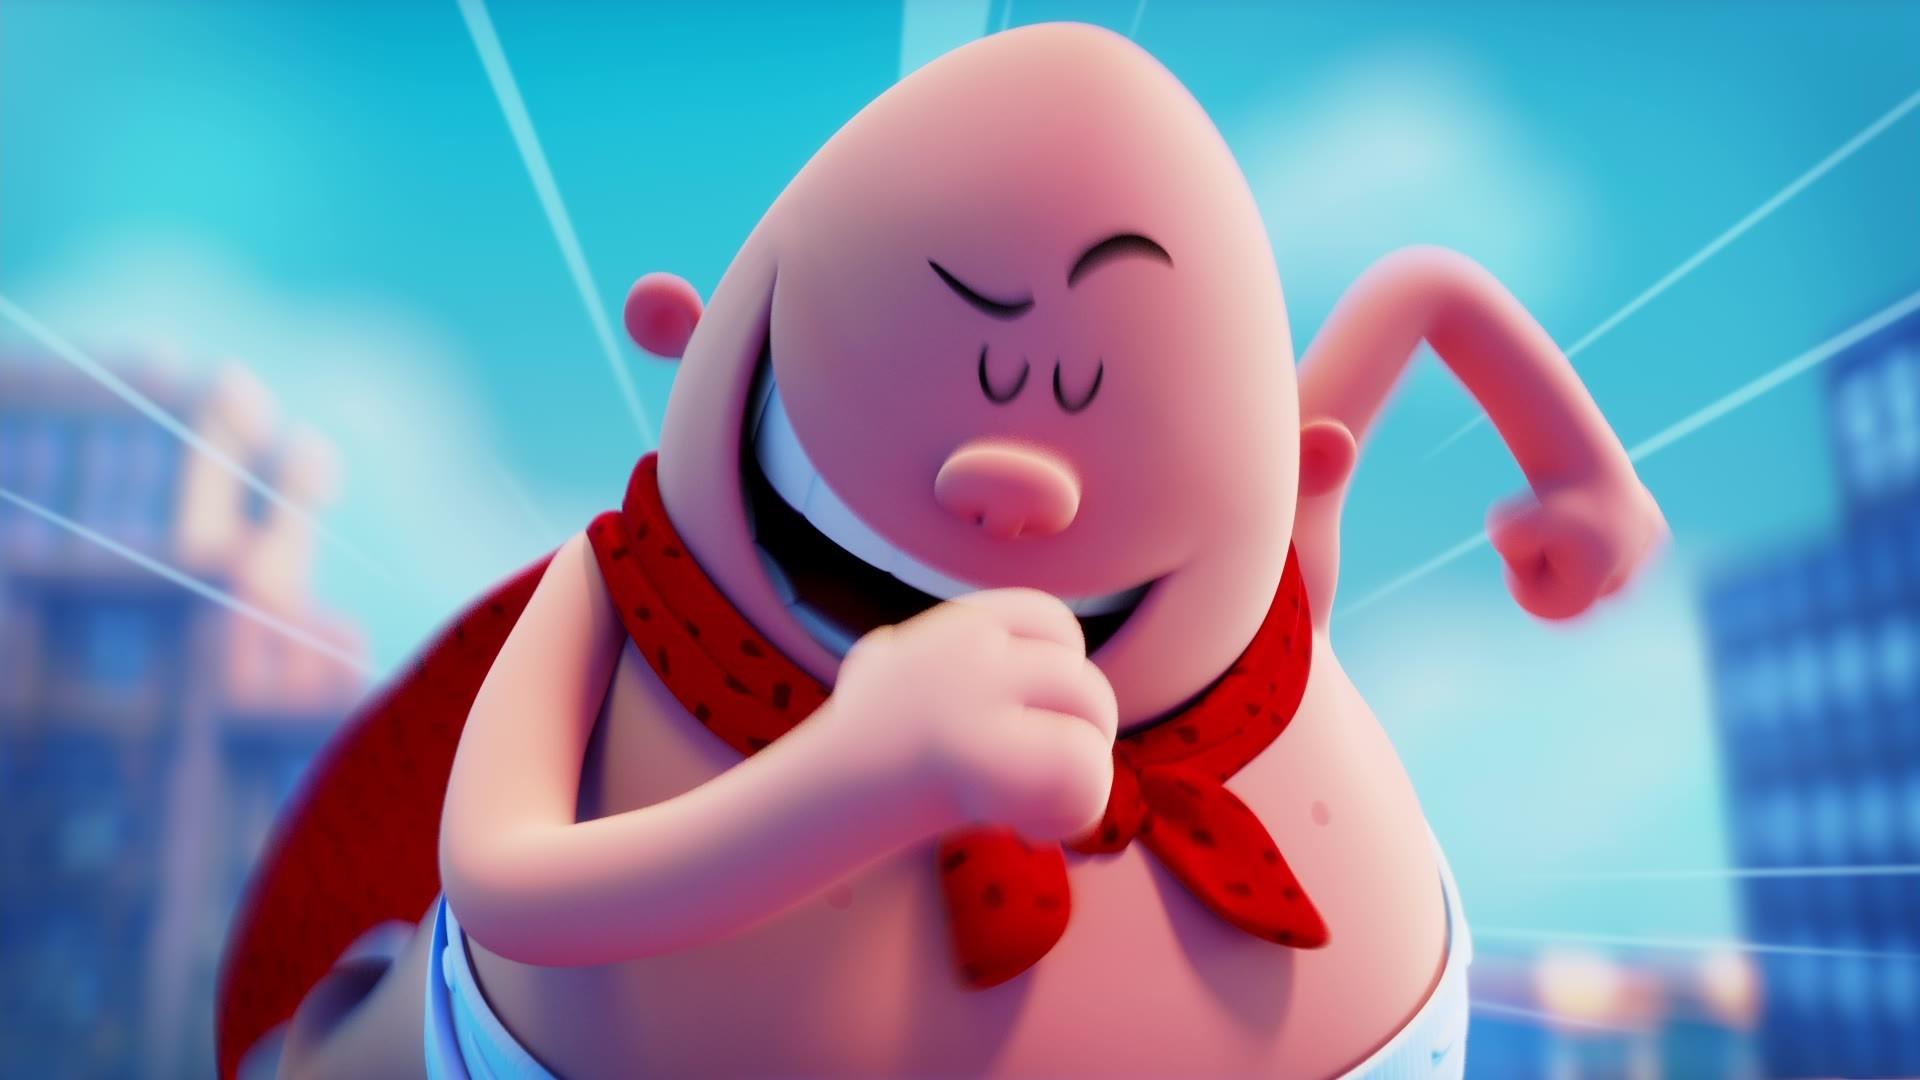 Silly But Serious: The Lessons of Captain Underpants